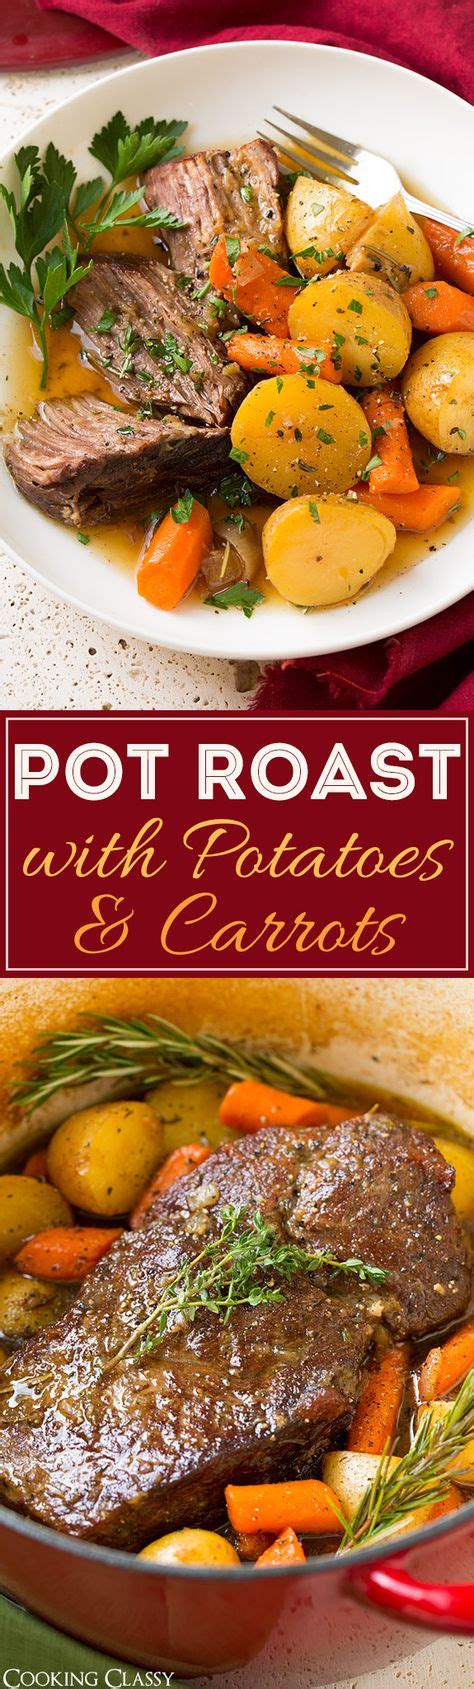 This easy slow cooker roast beef recipe with potatoes, rosemary, and carrots makes for an easy impressive dinner. Pot Roast with Potatoes and Carrots - this is any easy one pot dinner that my whole family loves ...